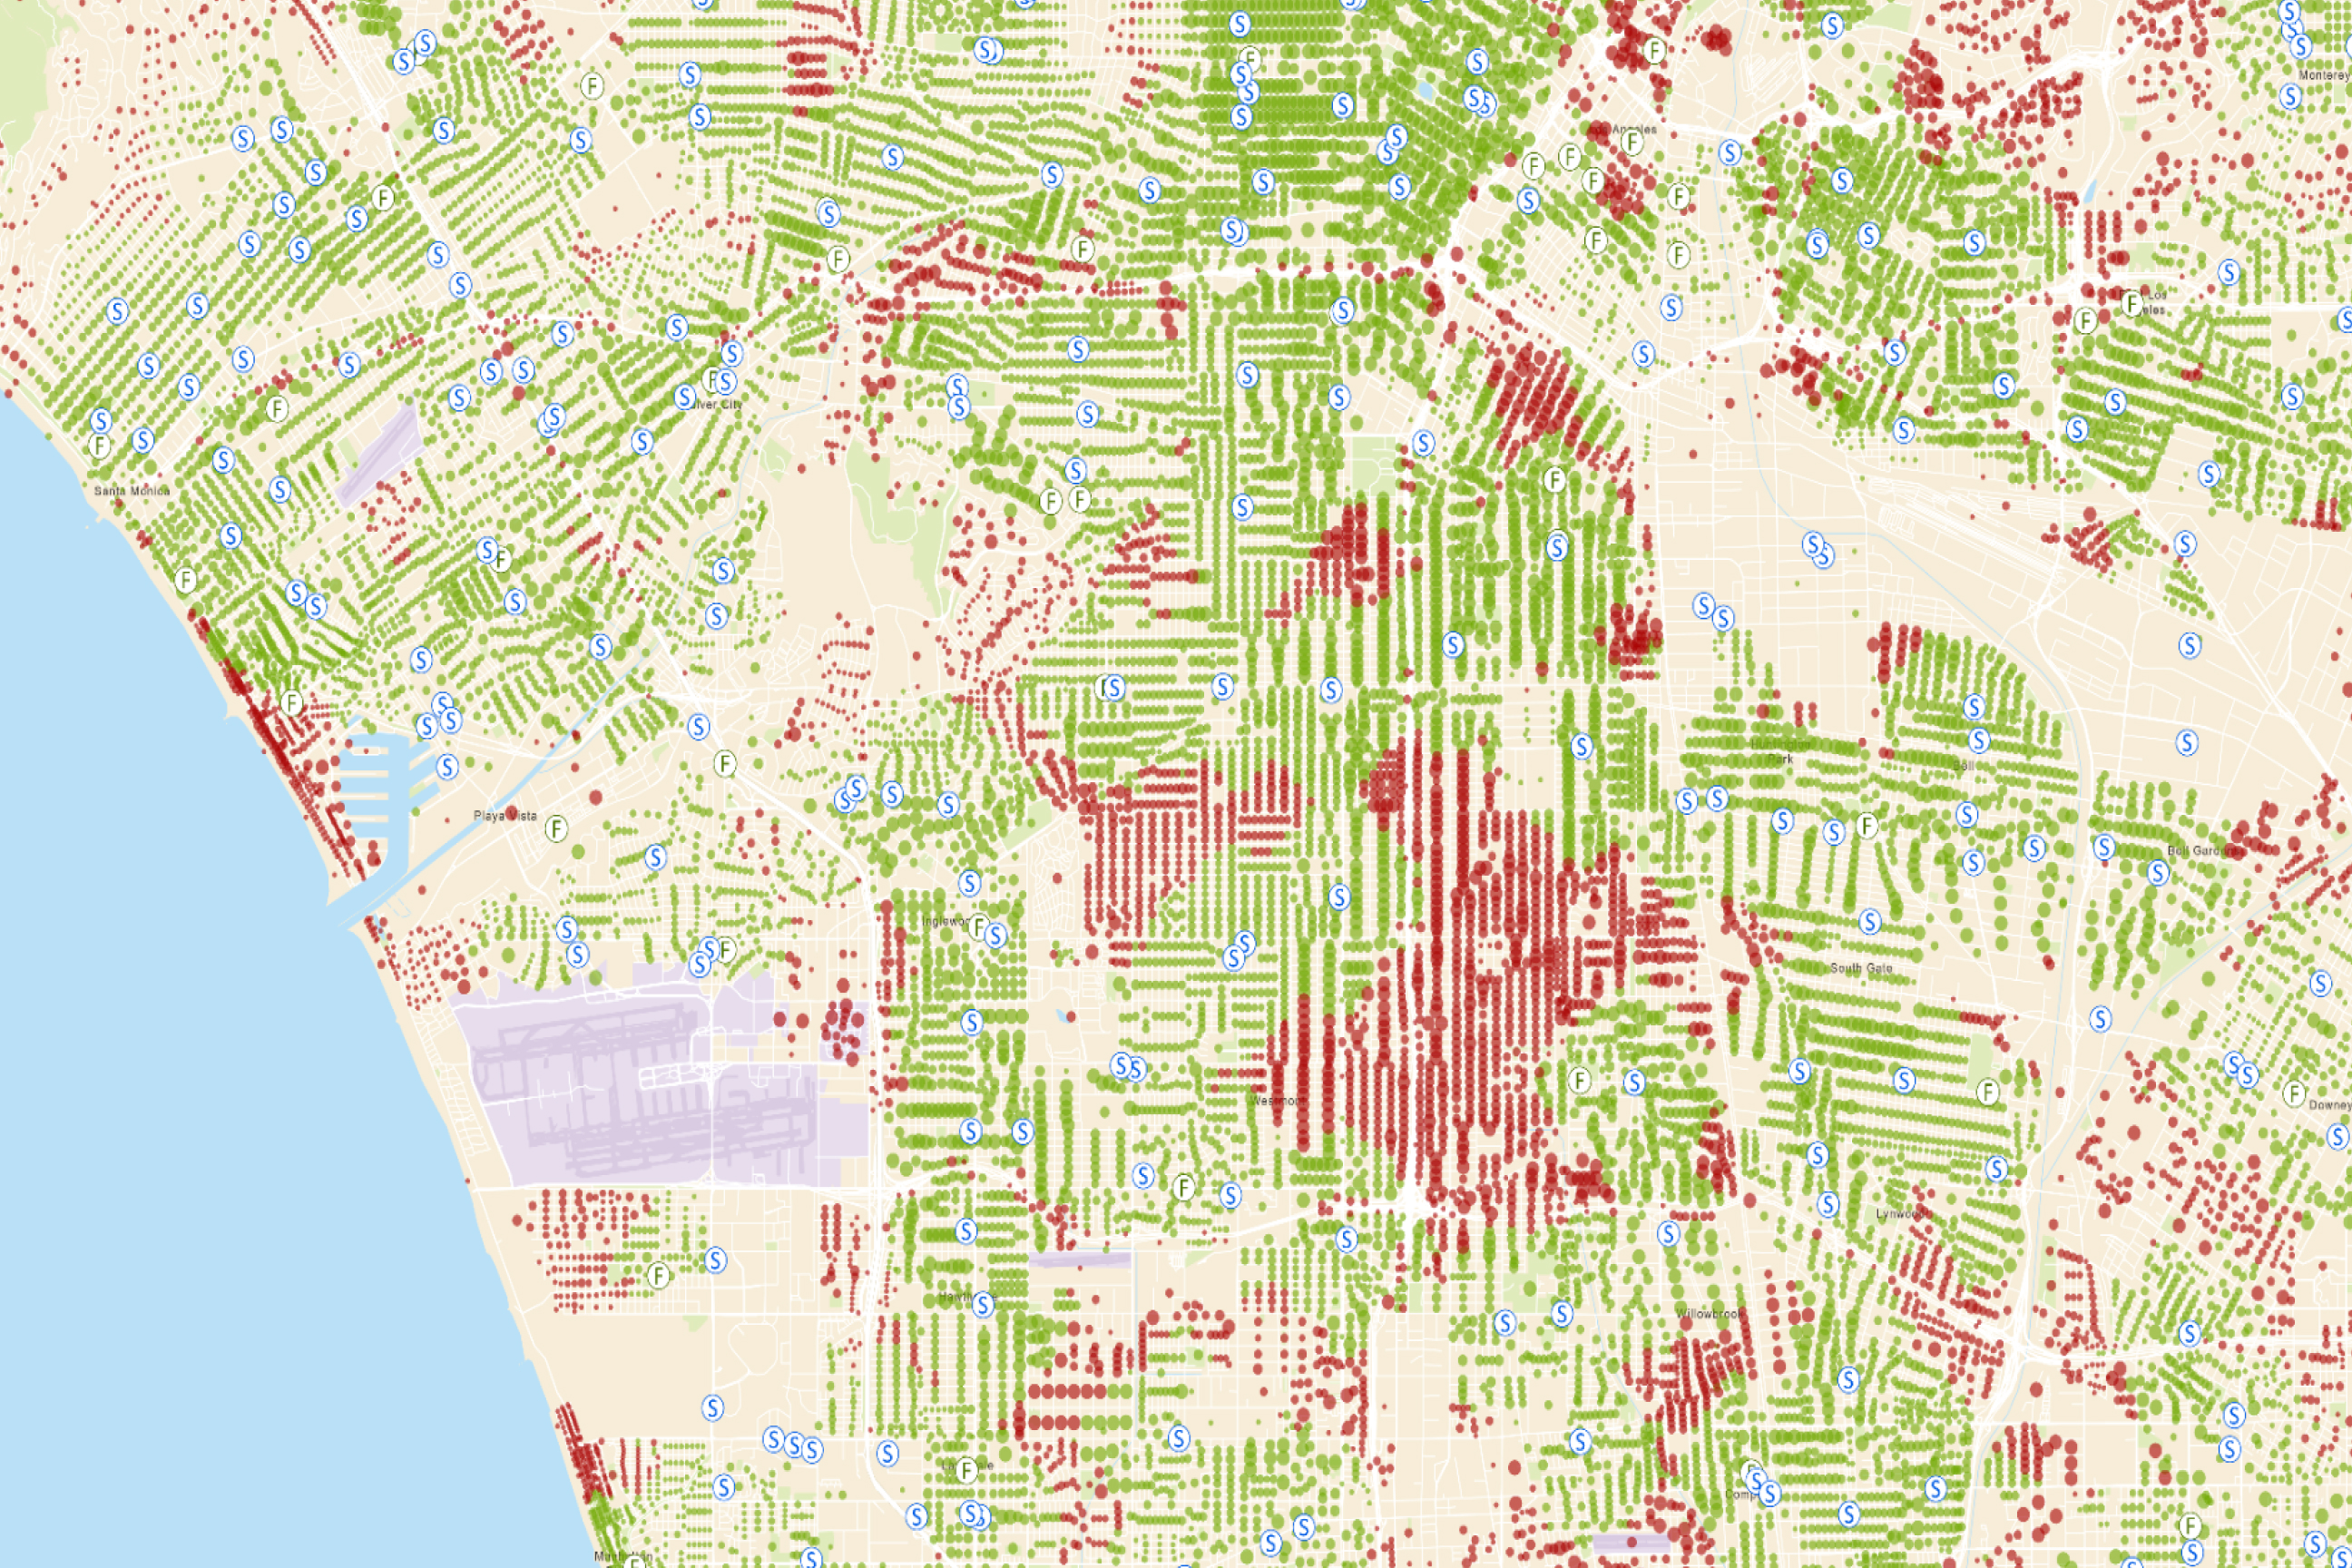 Los Angeles food access map